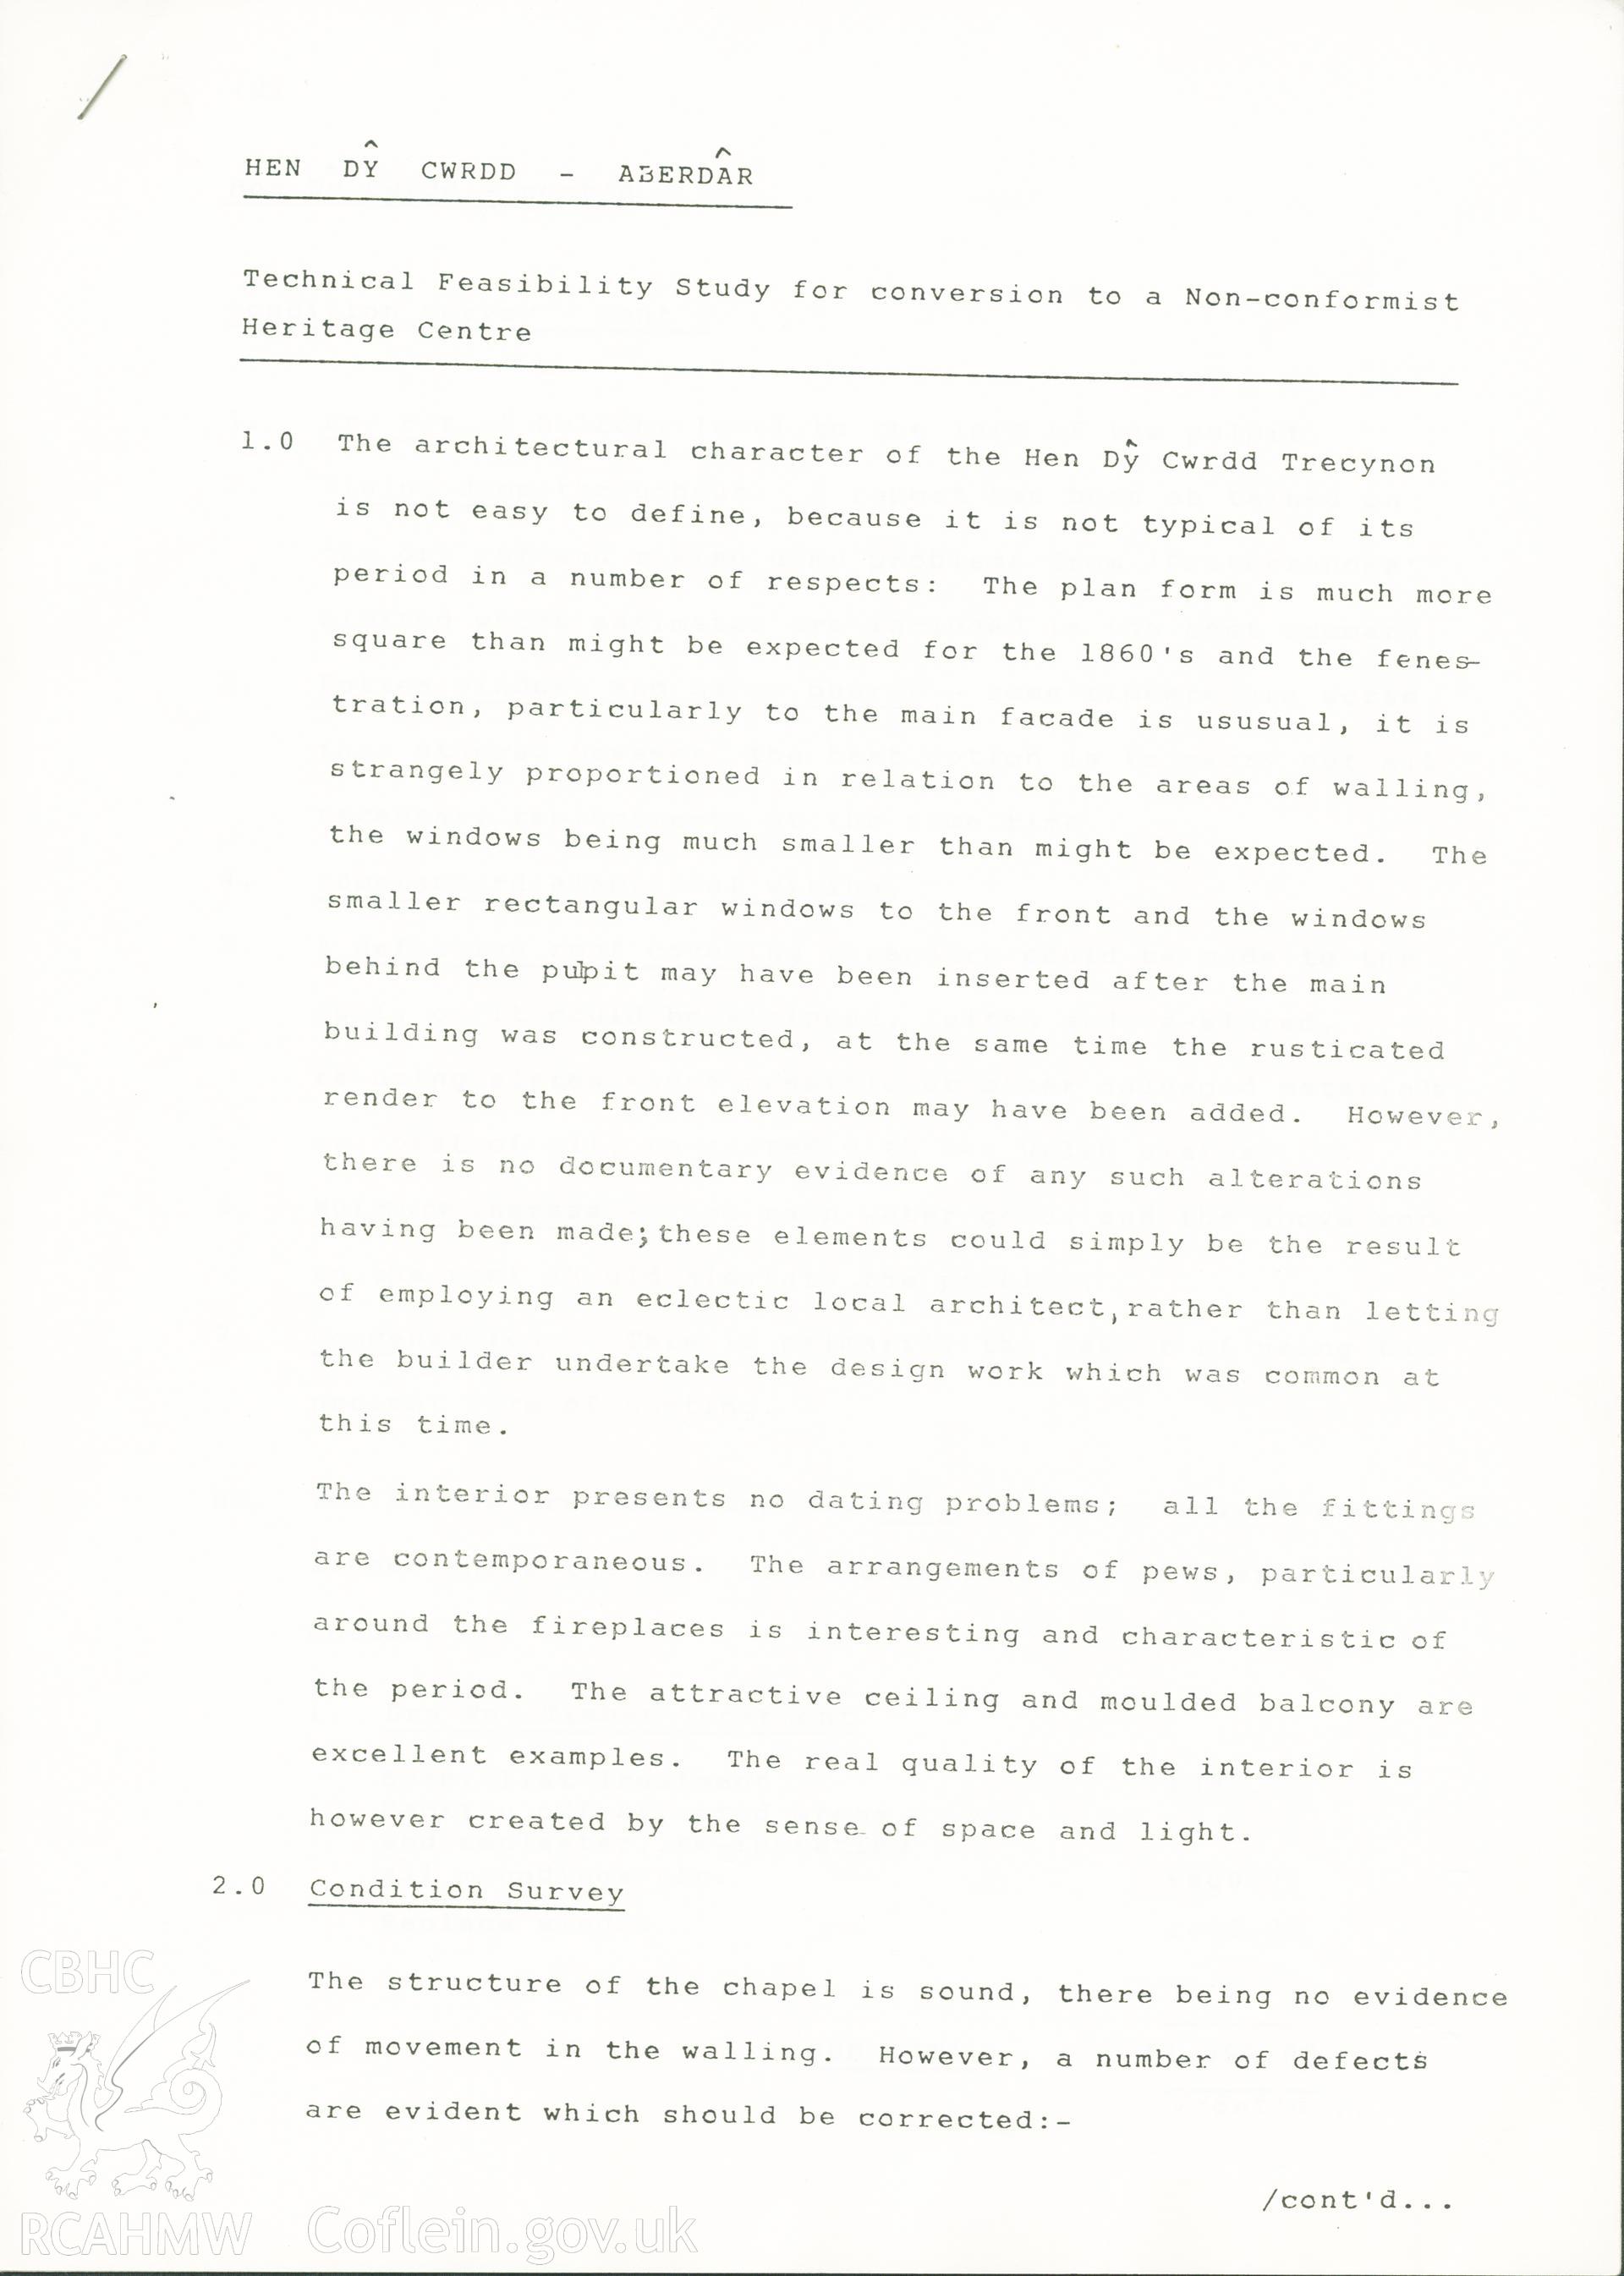 Document assessing the feasibility of converting Yr Hen Dy Cwrdd into a Non-conformist Heritage Centre, 20th May 1985. This page provides an overview of its architecture and part of condition survey. Donated to the RCAHMW during the Digital Dissent Project.